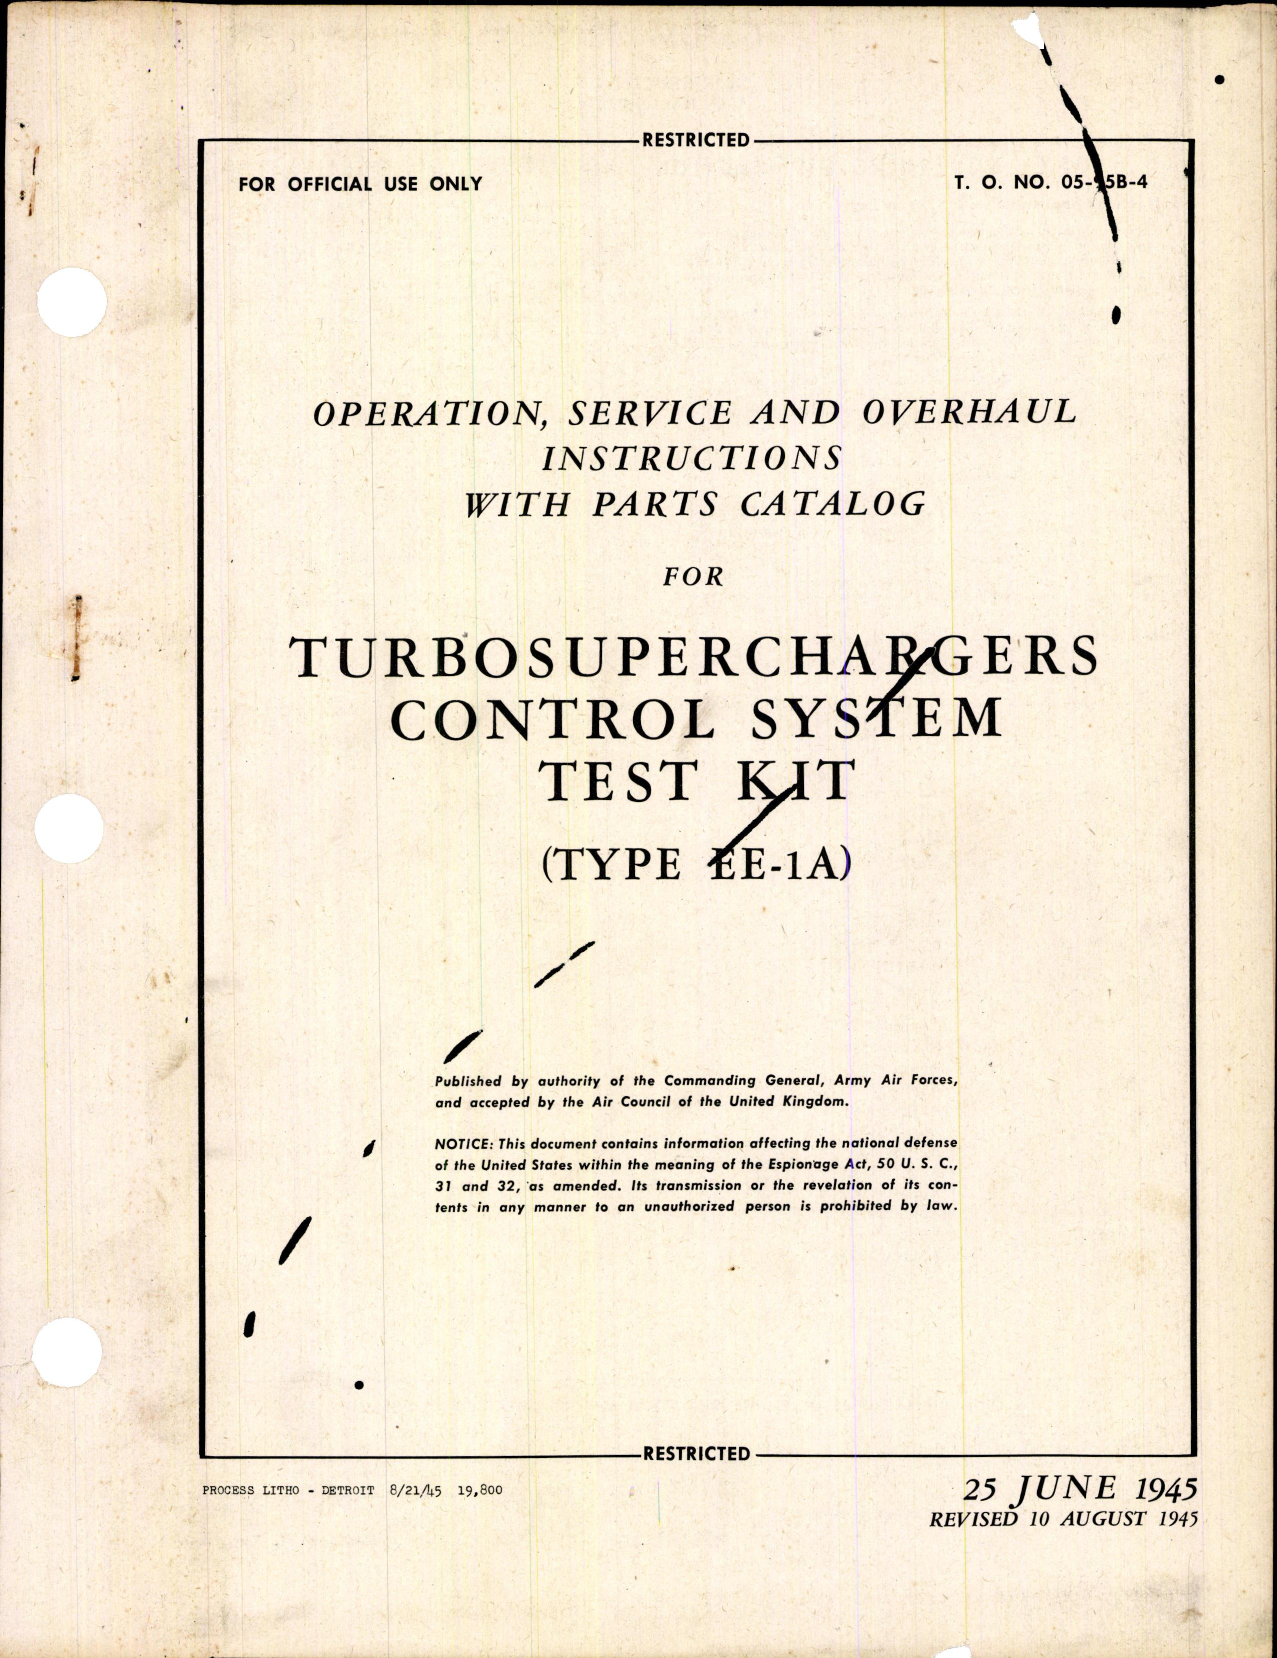 Sample page 1 from AirCorps Library document: Instructions for Turbosuperchargers Control System Test Kit (Type EE-1A)